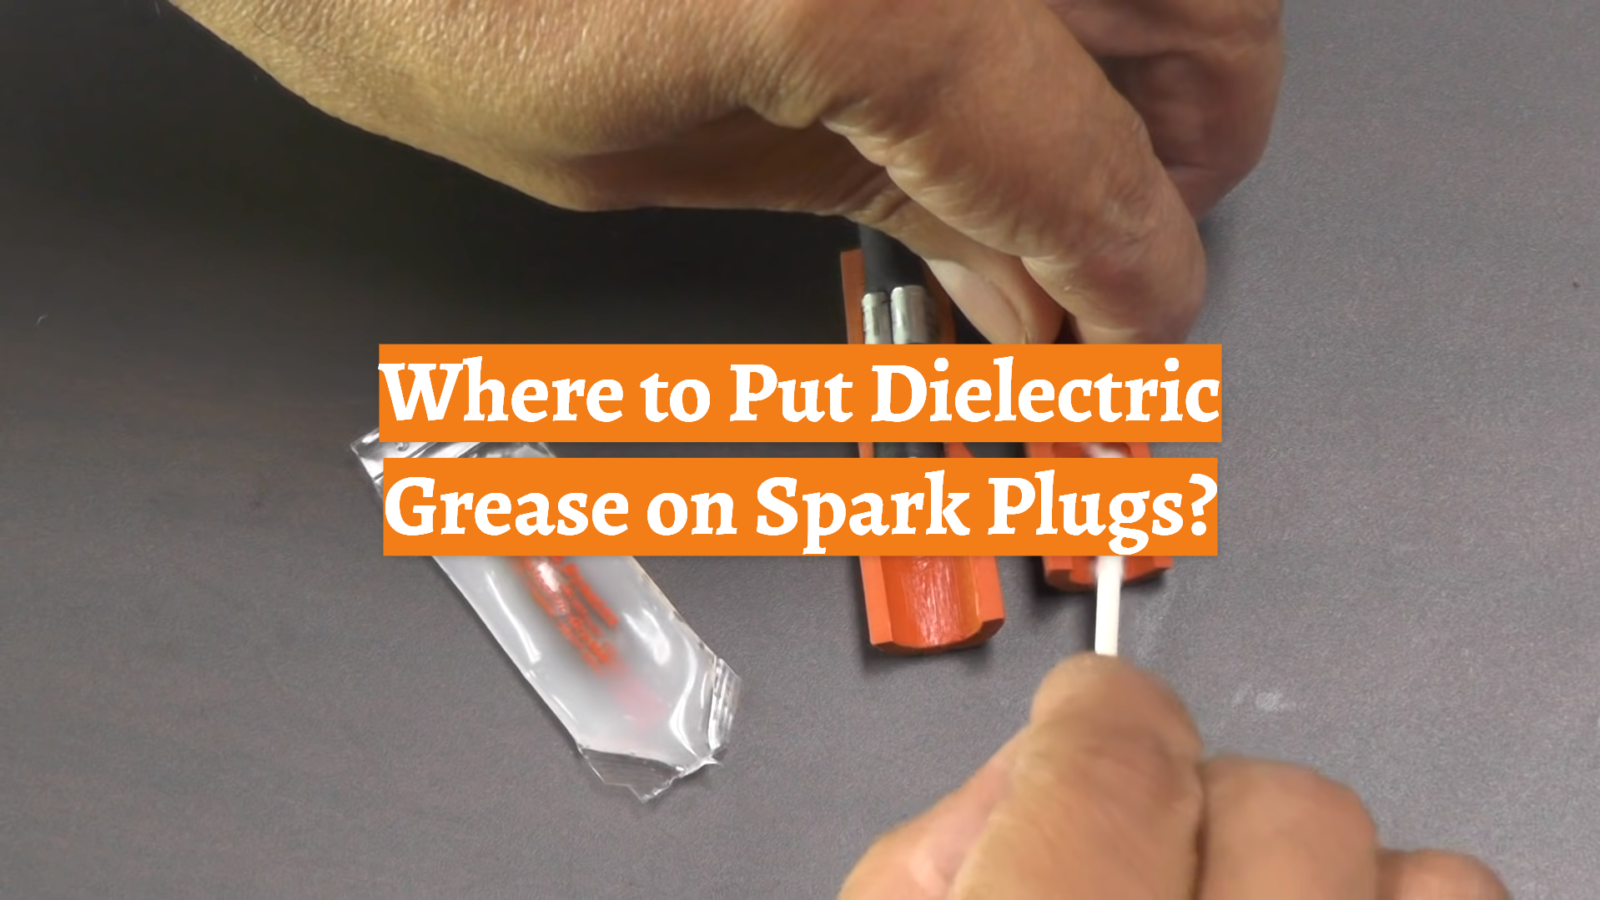 Where to Put Dielectric Grease on Spark Plugs?